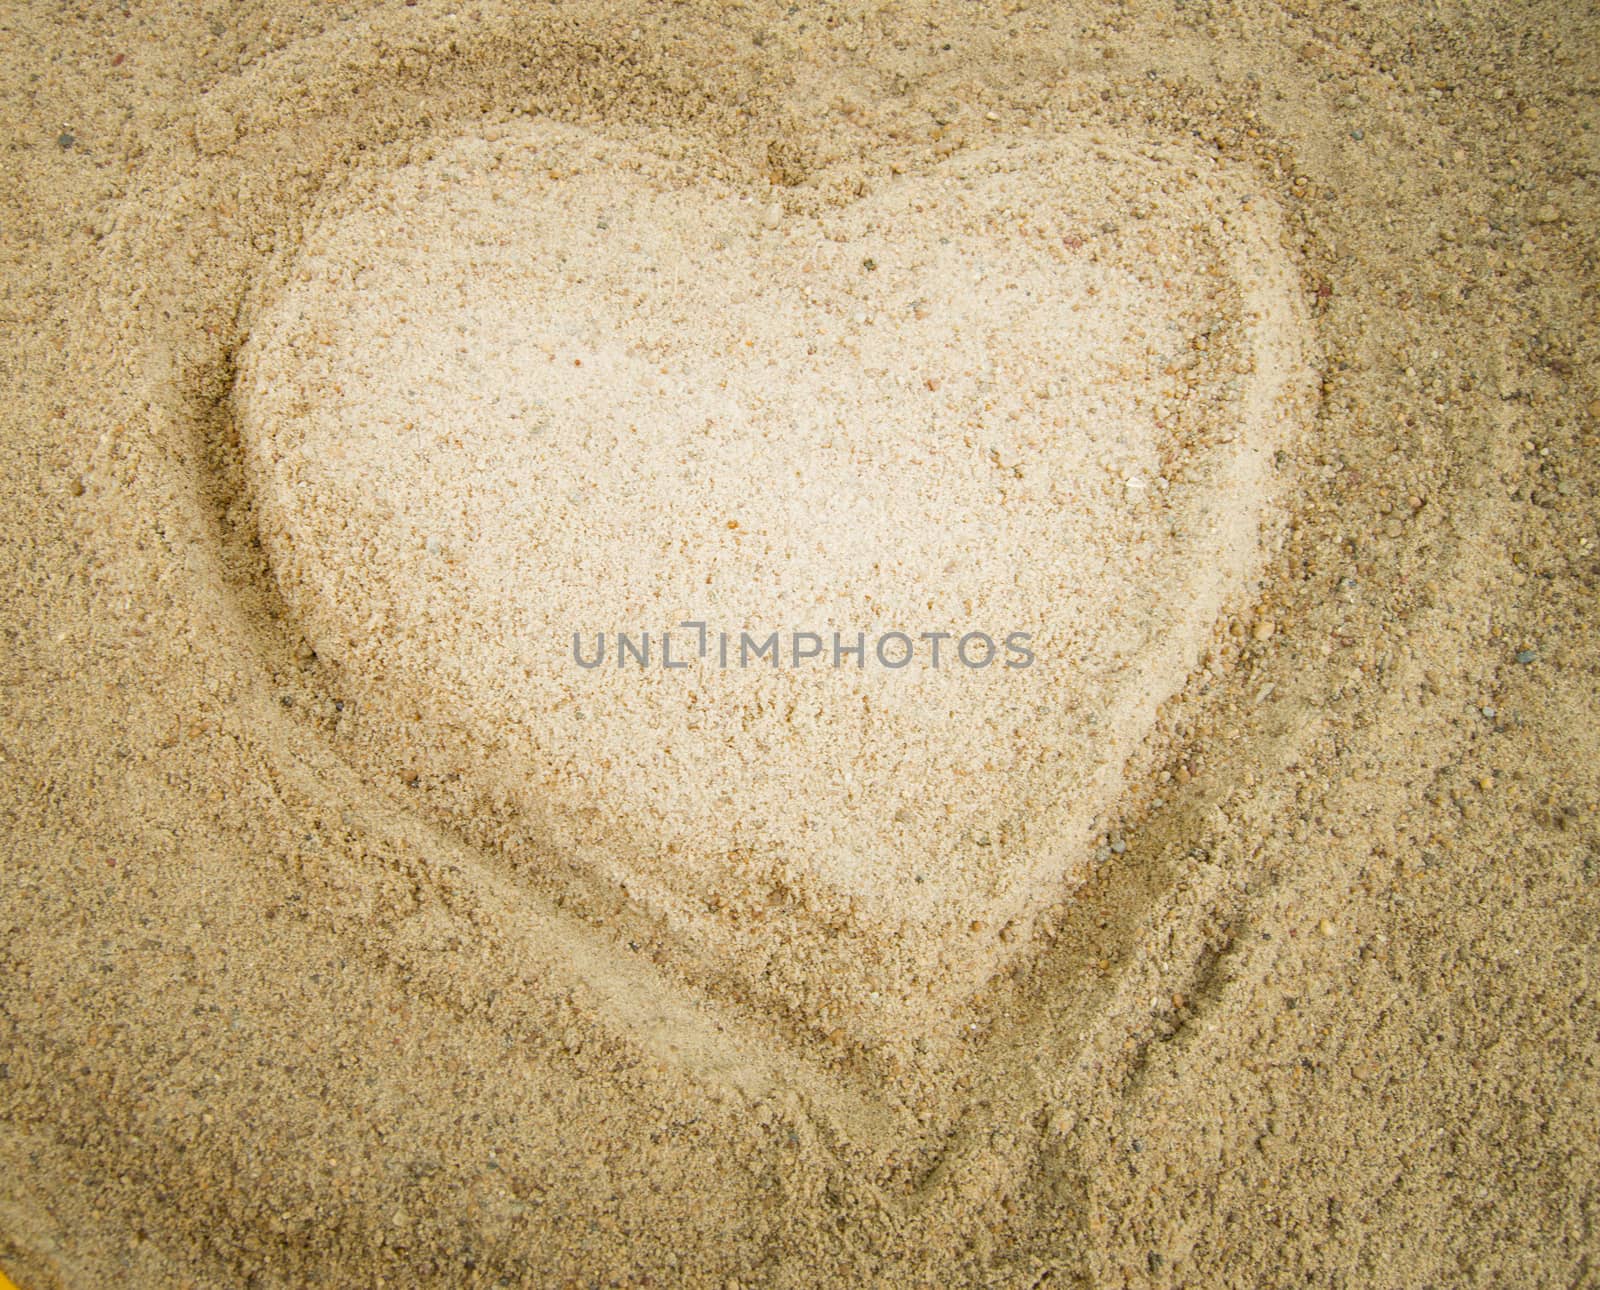 Heart drawn in the sand, a symbol of love, Valentine's by claire_lucia